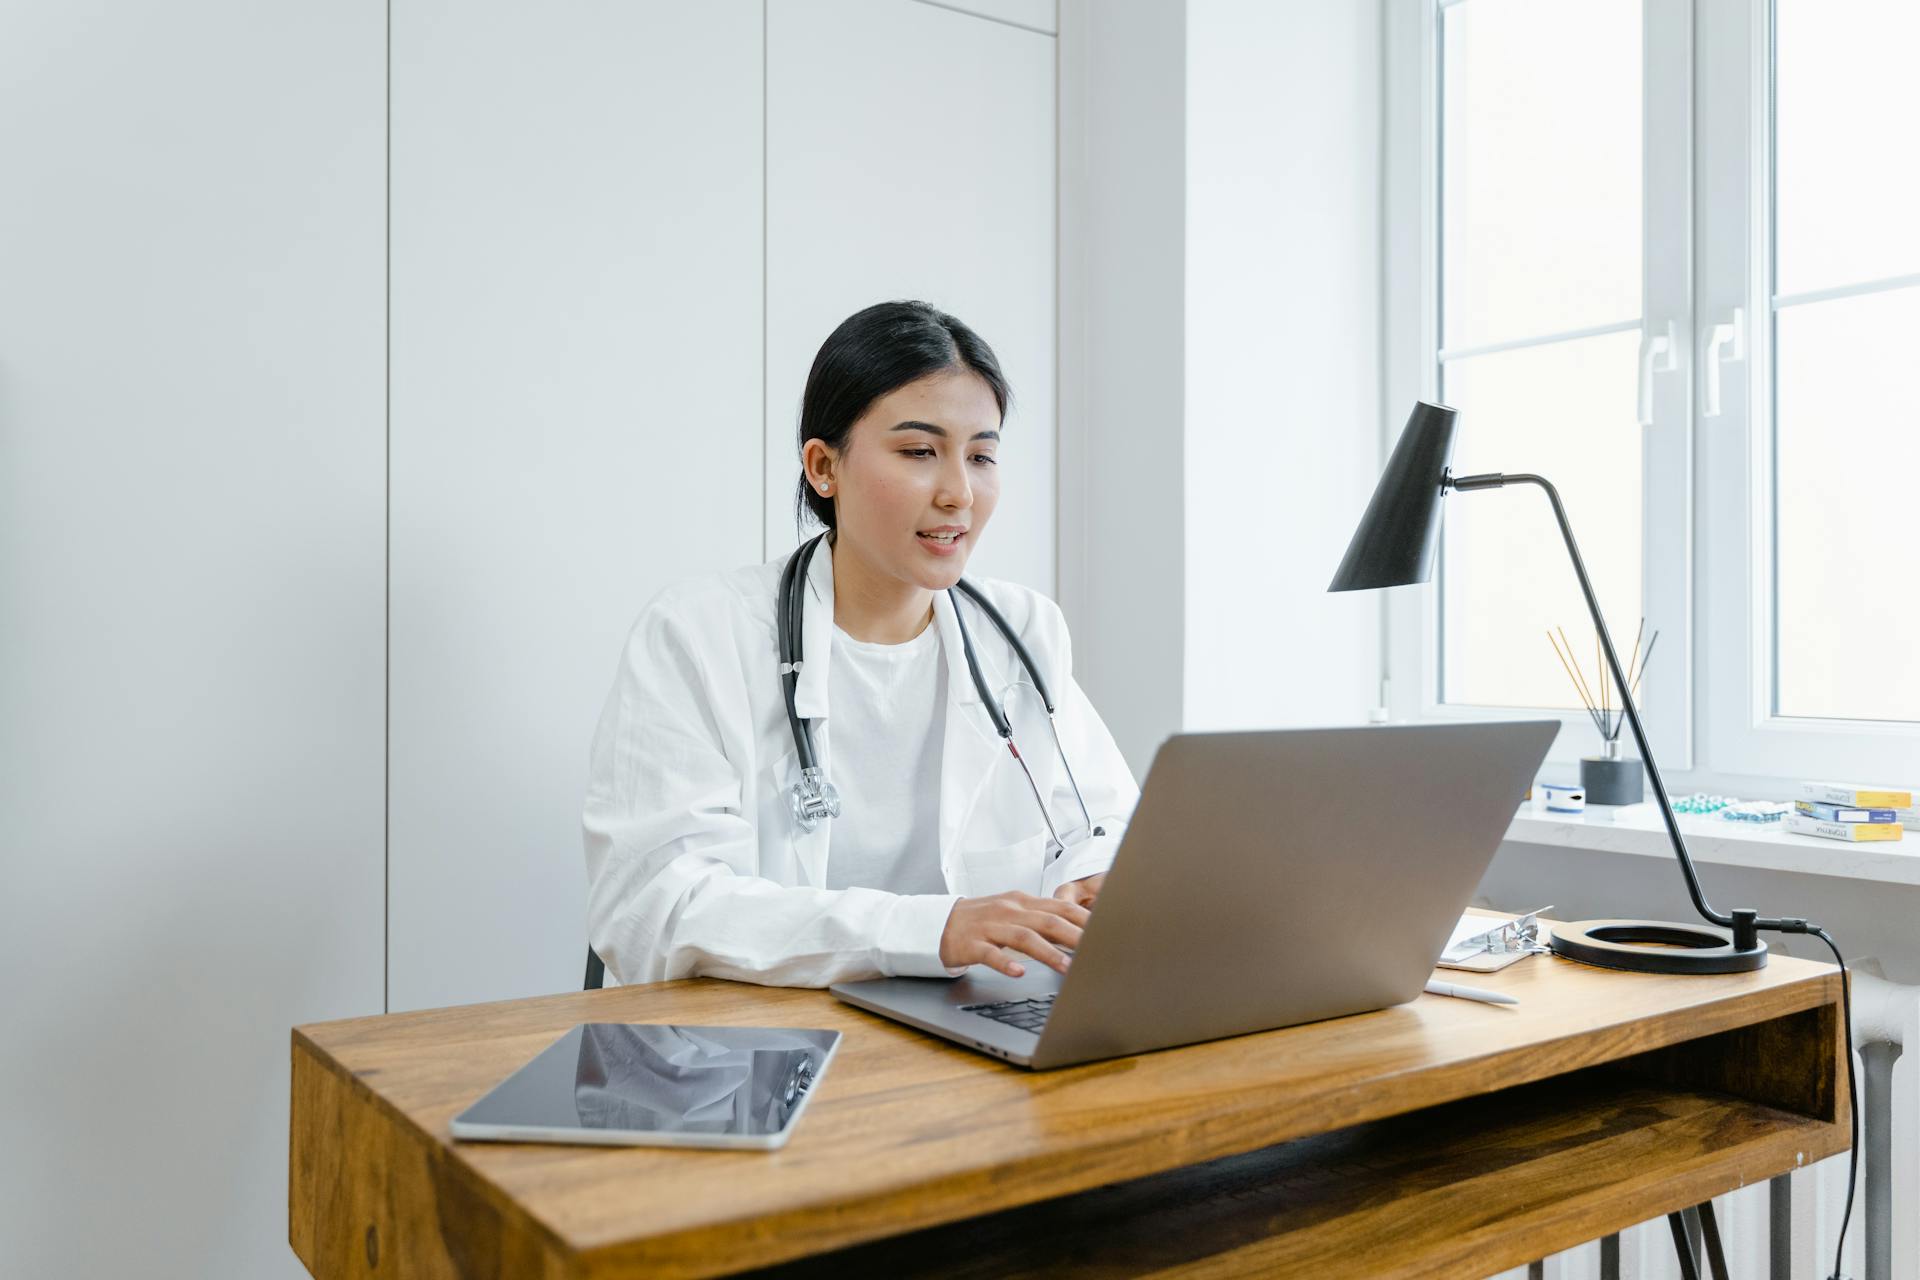 A doctor sitting at a desk | Source: Pexels